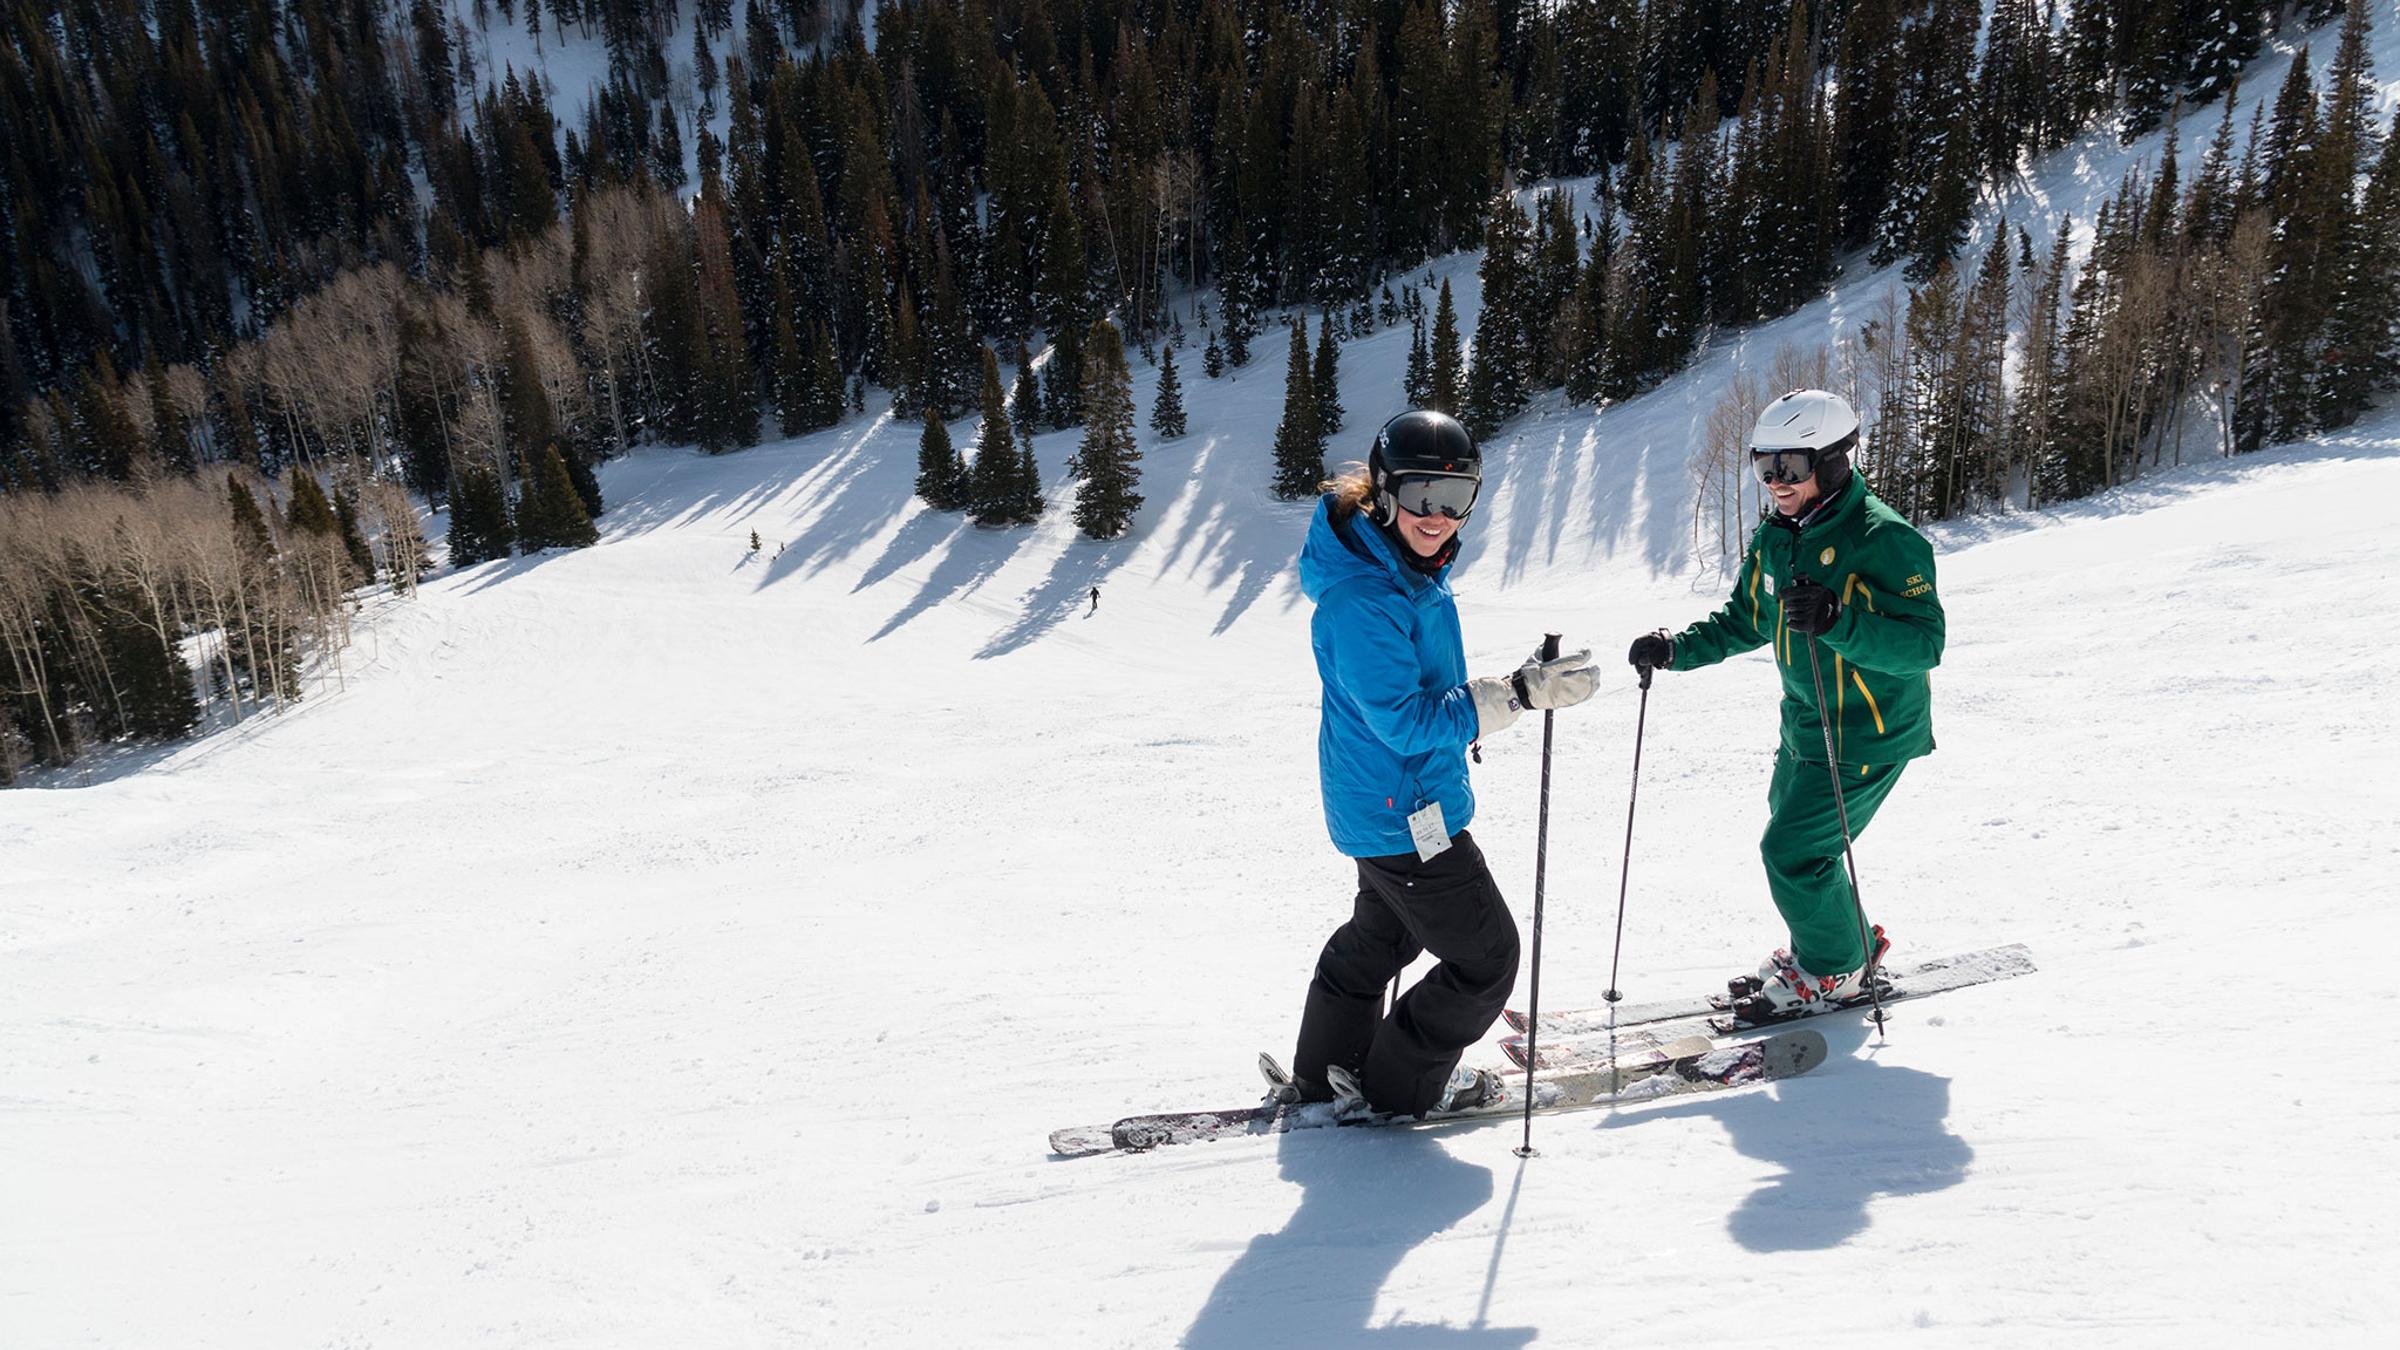 A guest taking a ski lesson at Deer Valley Resort